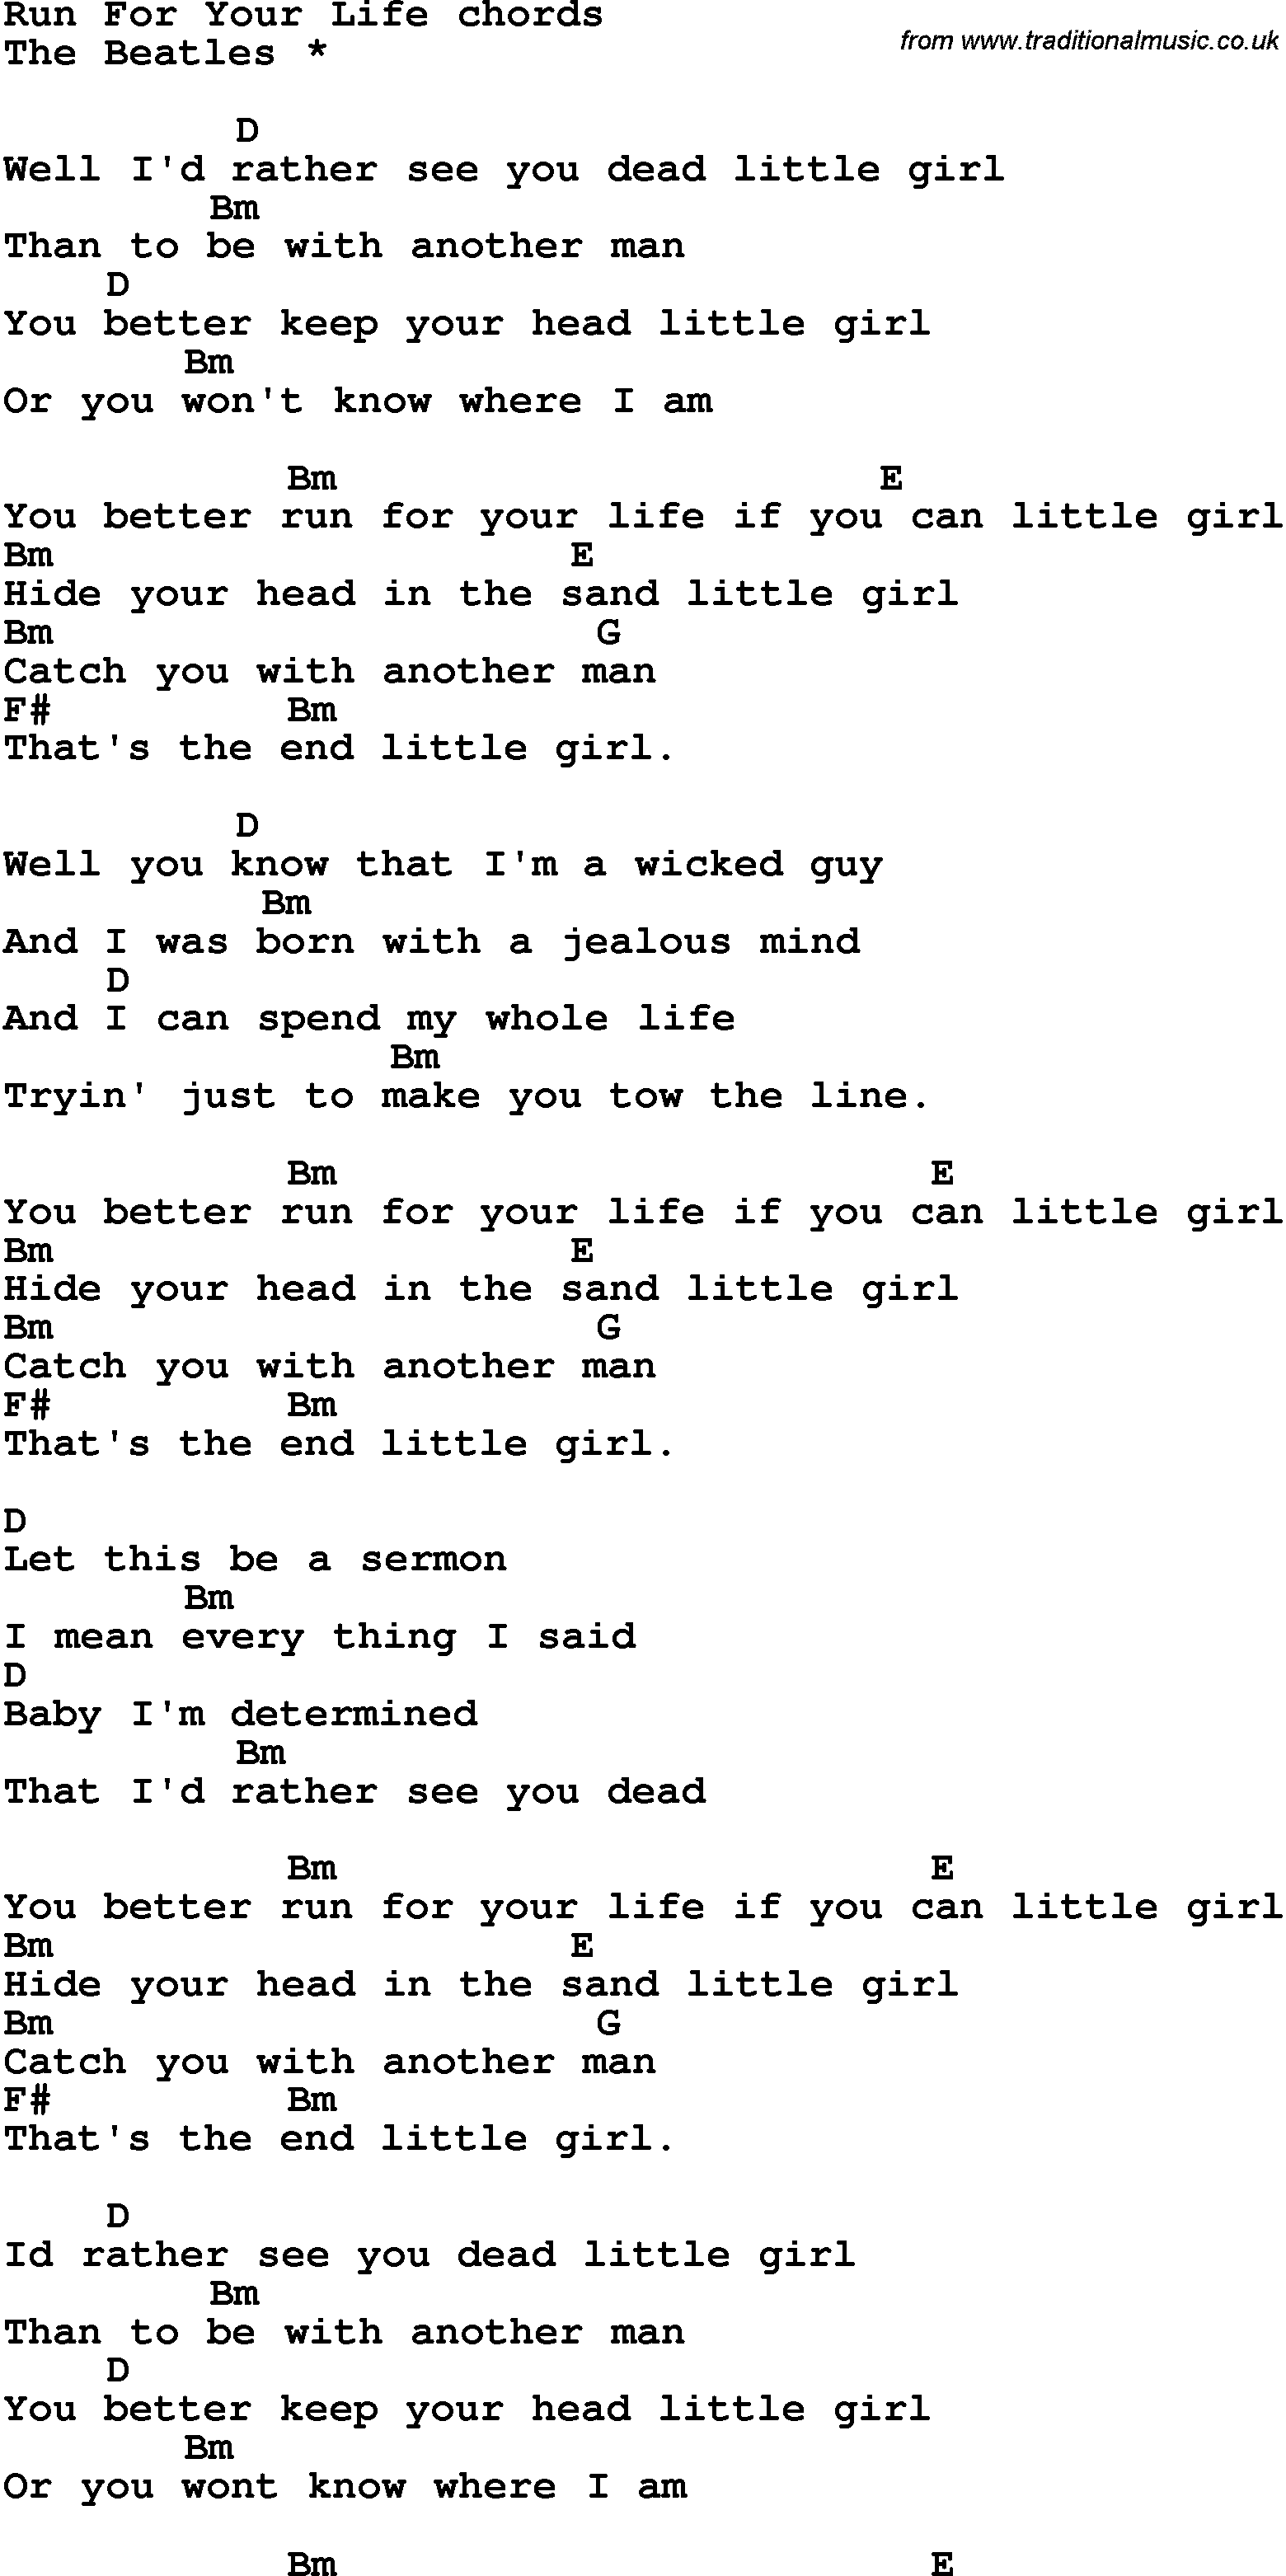 Song Lyrics with guitar chords for Run For Your Life - The Beatles